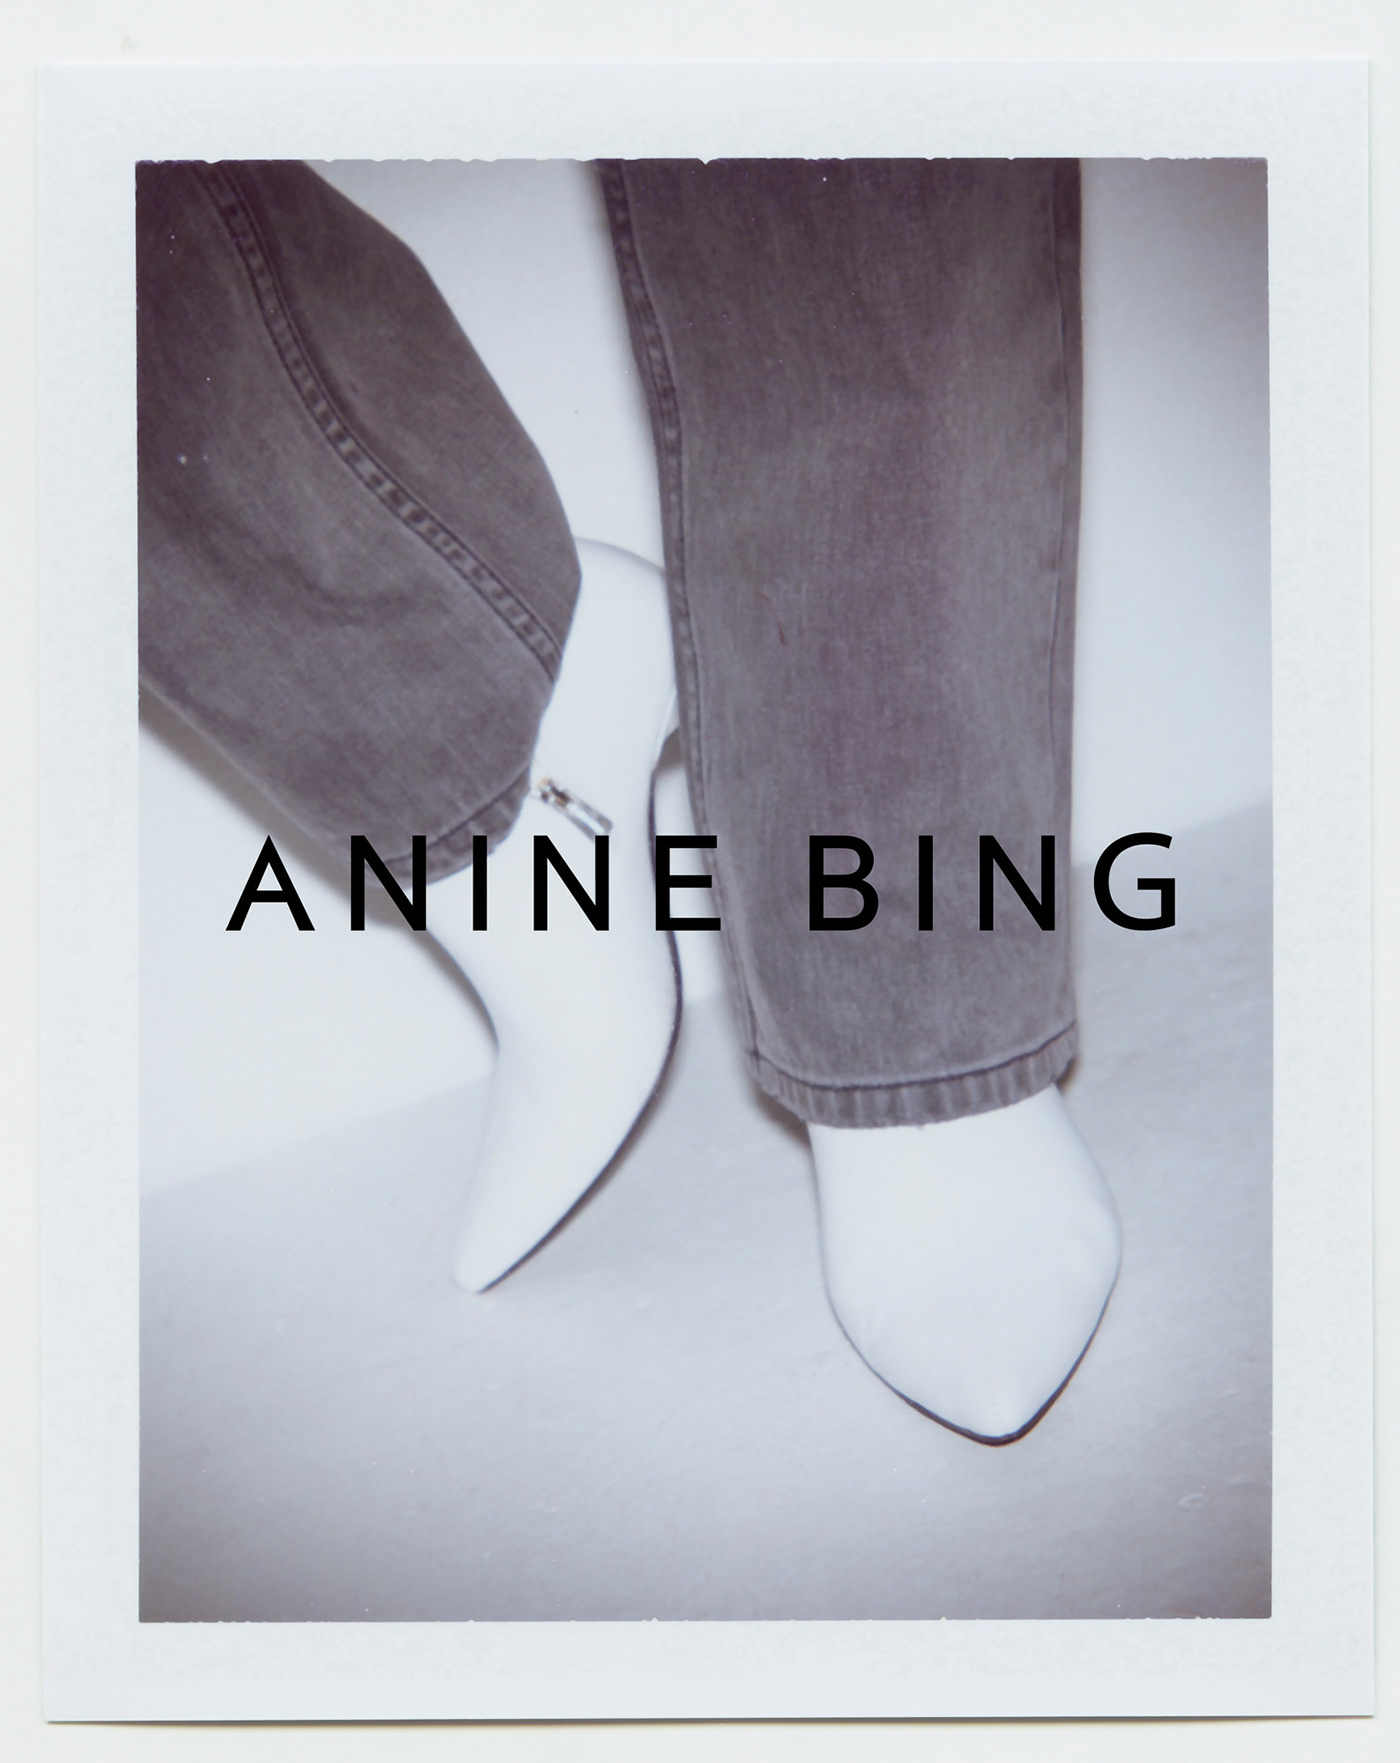 benjo arwas anine bing bambi northwood-blyth fashion photography campaign red white blue 90s Denim editorial Los Angeles